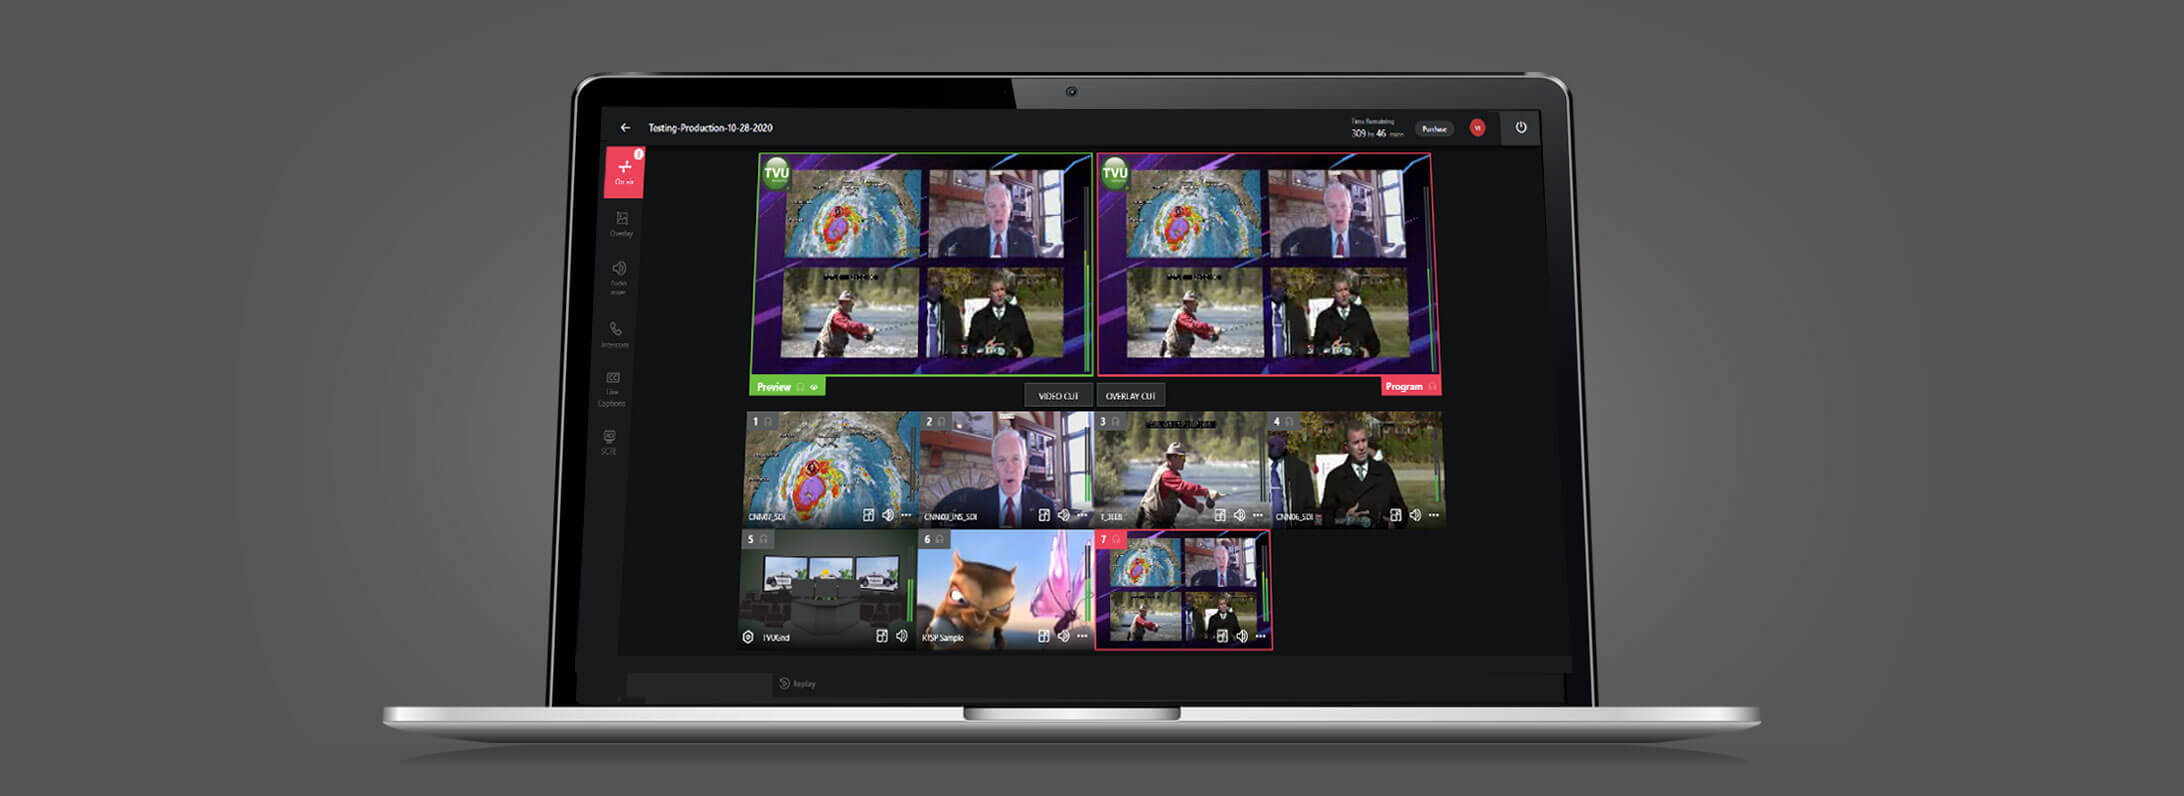 Live video editing and remote production platform